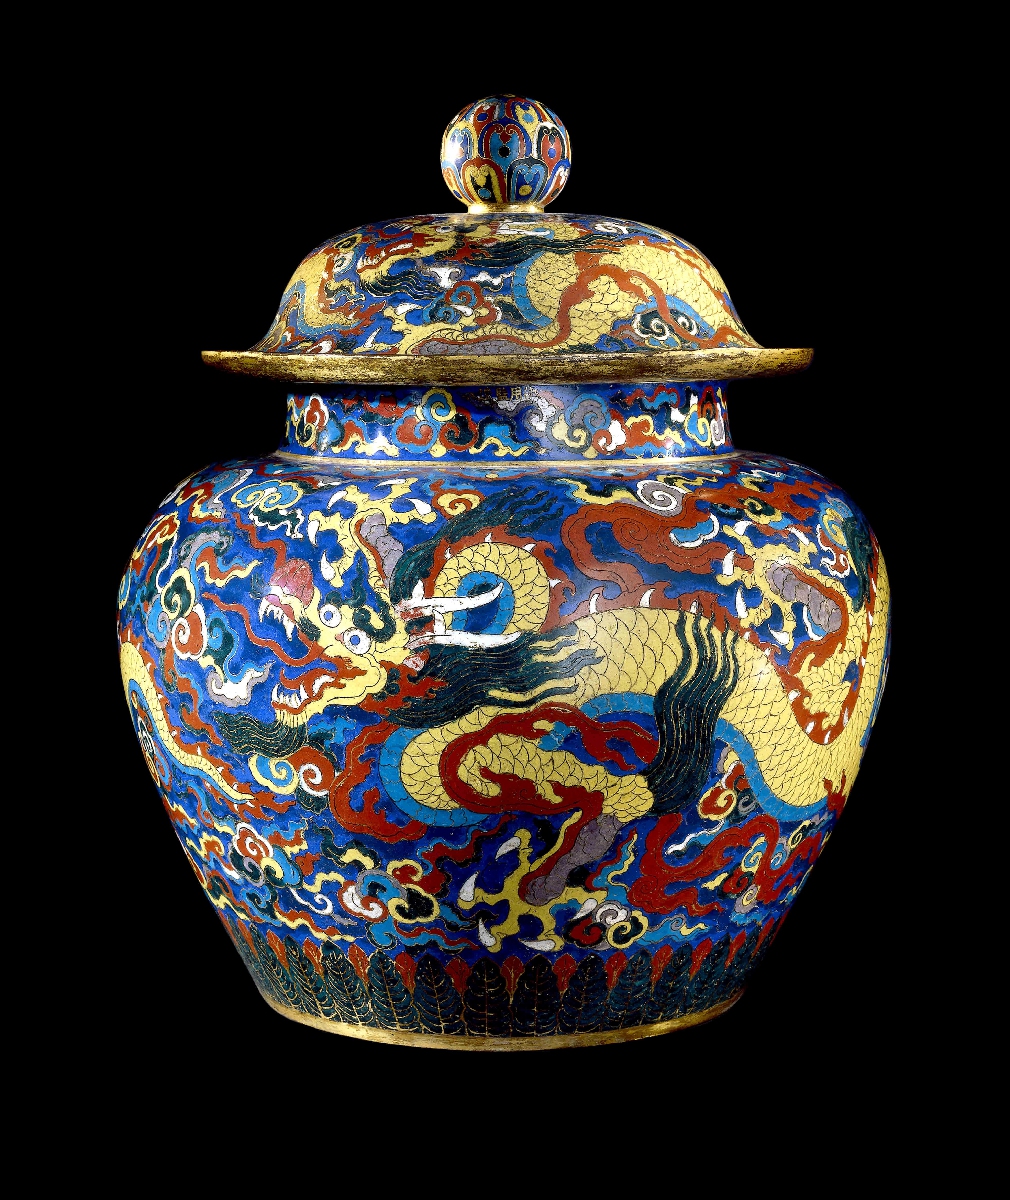 A Chinese porcelain ware collected by the British Museum Photo: IC